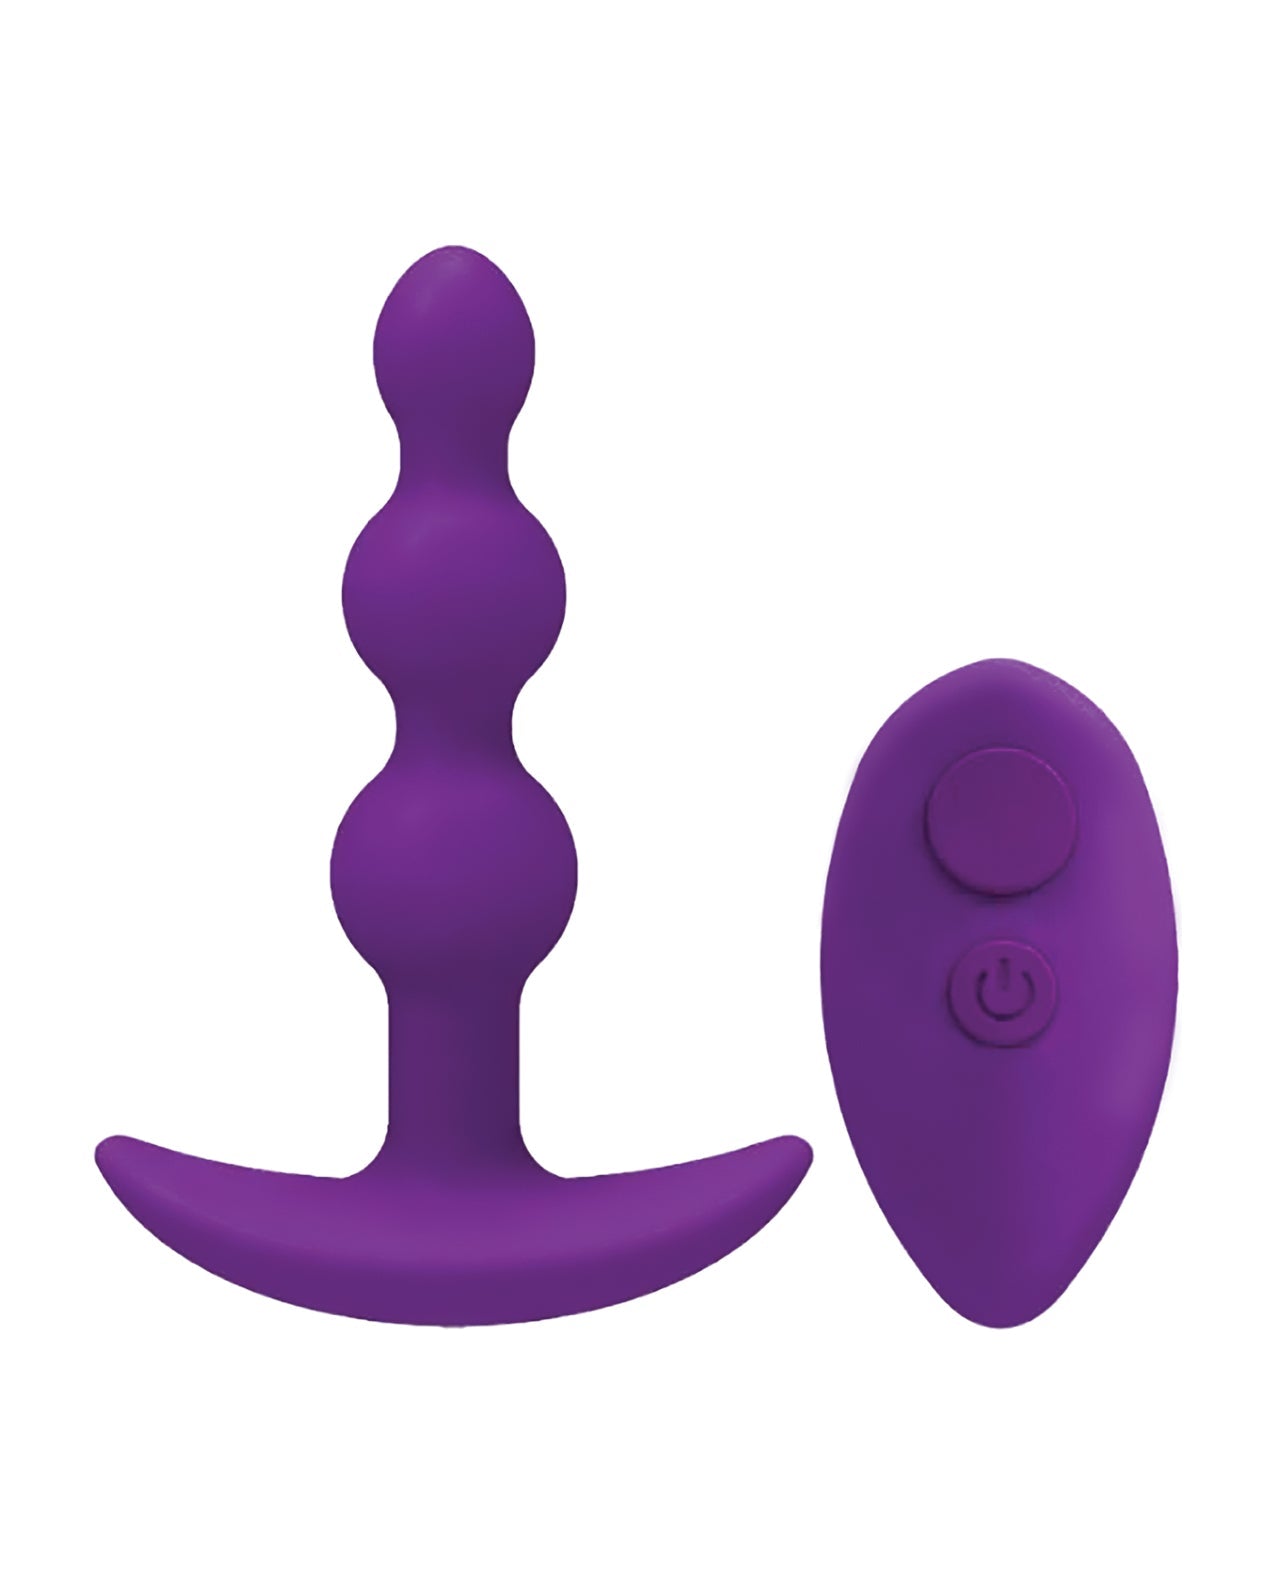 Purchase A Play Beaded Rechargeable Anal Plug w/Remote - Purple